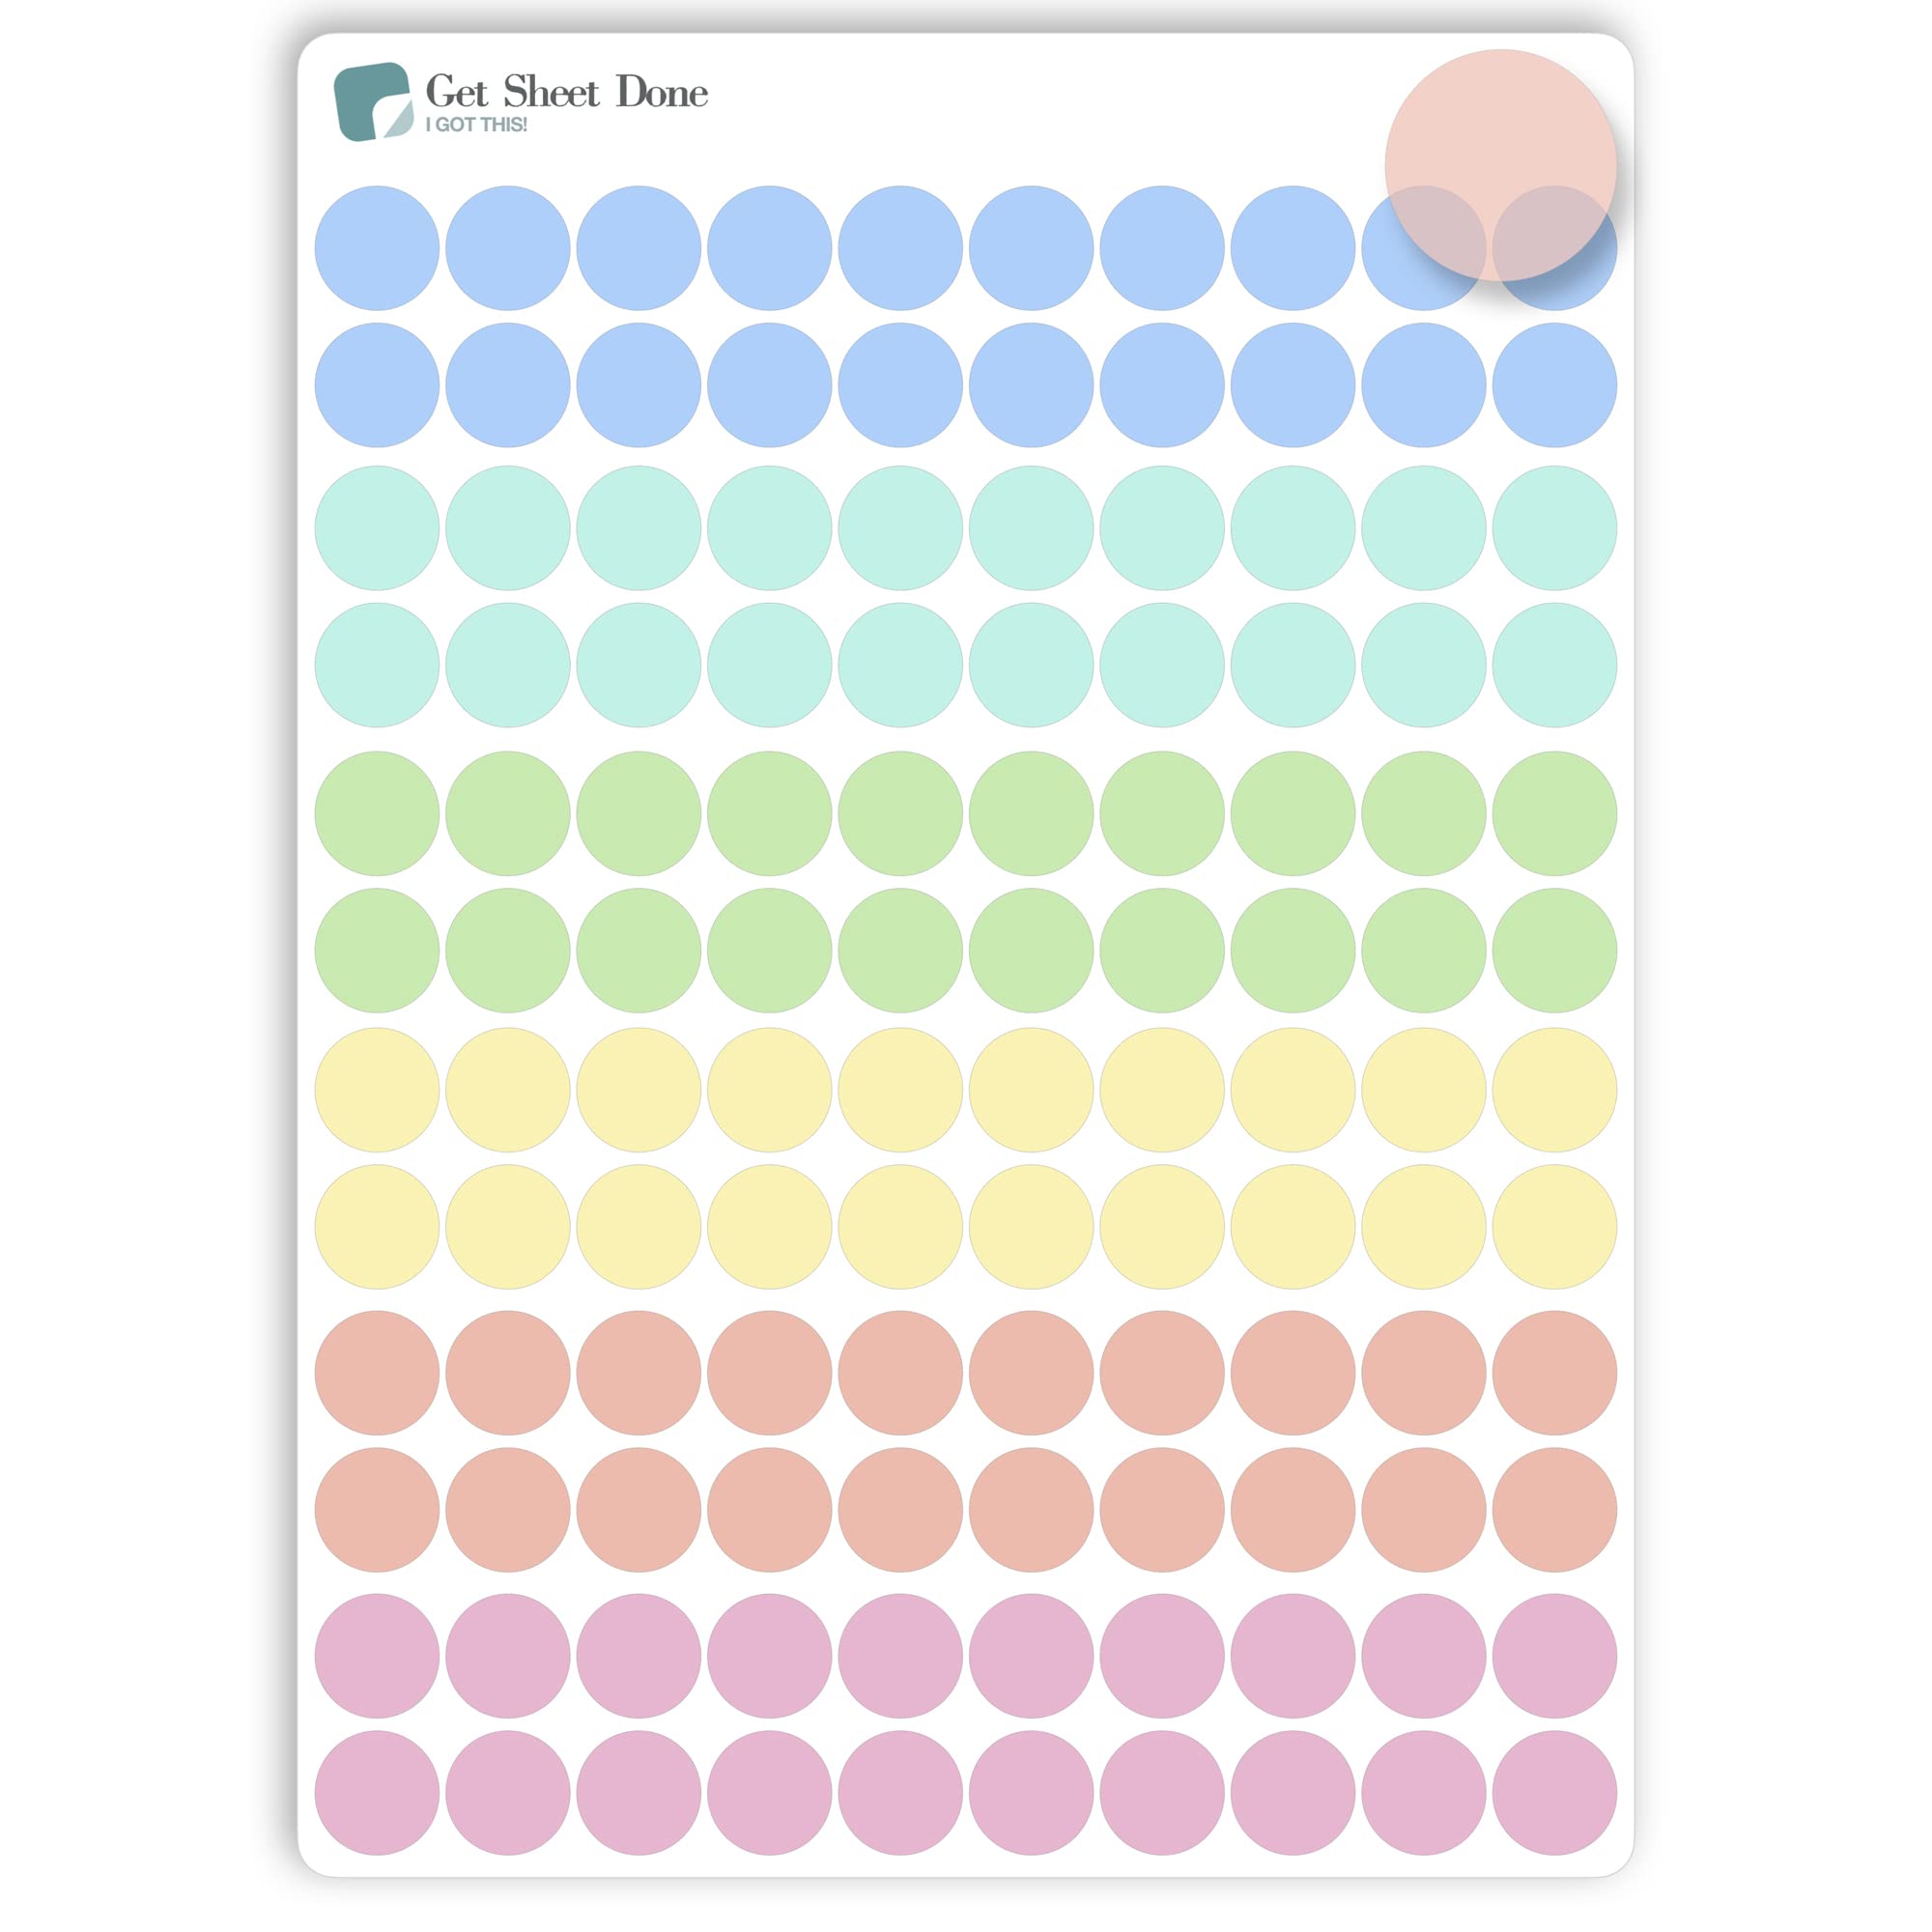 Transparent Dot  / 120 Translucent Vinyl  (1/3?) / Accent Markers Highlight  Flag /Date Covers/Essential Productivity Life/Bullet Bujo Journal Planner Stickers / Bullet Journaling / Bujo / Essential Productivity Stickers